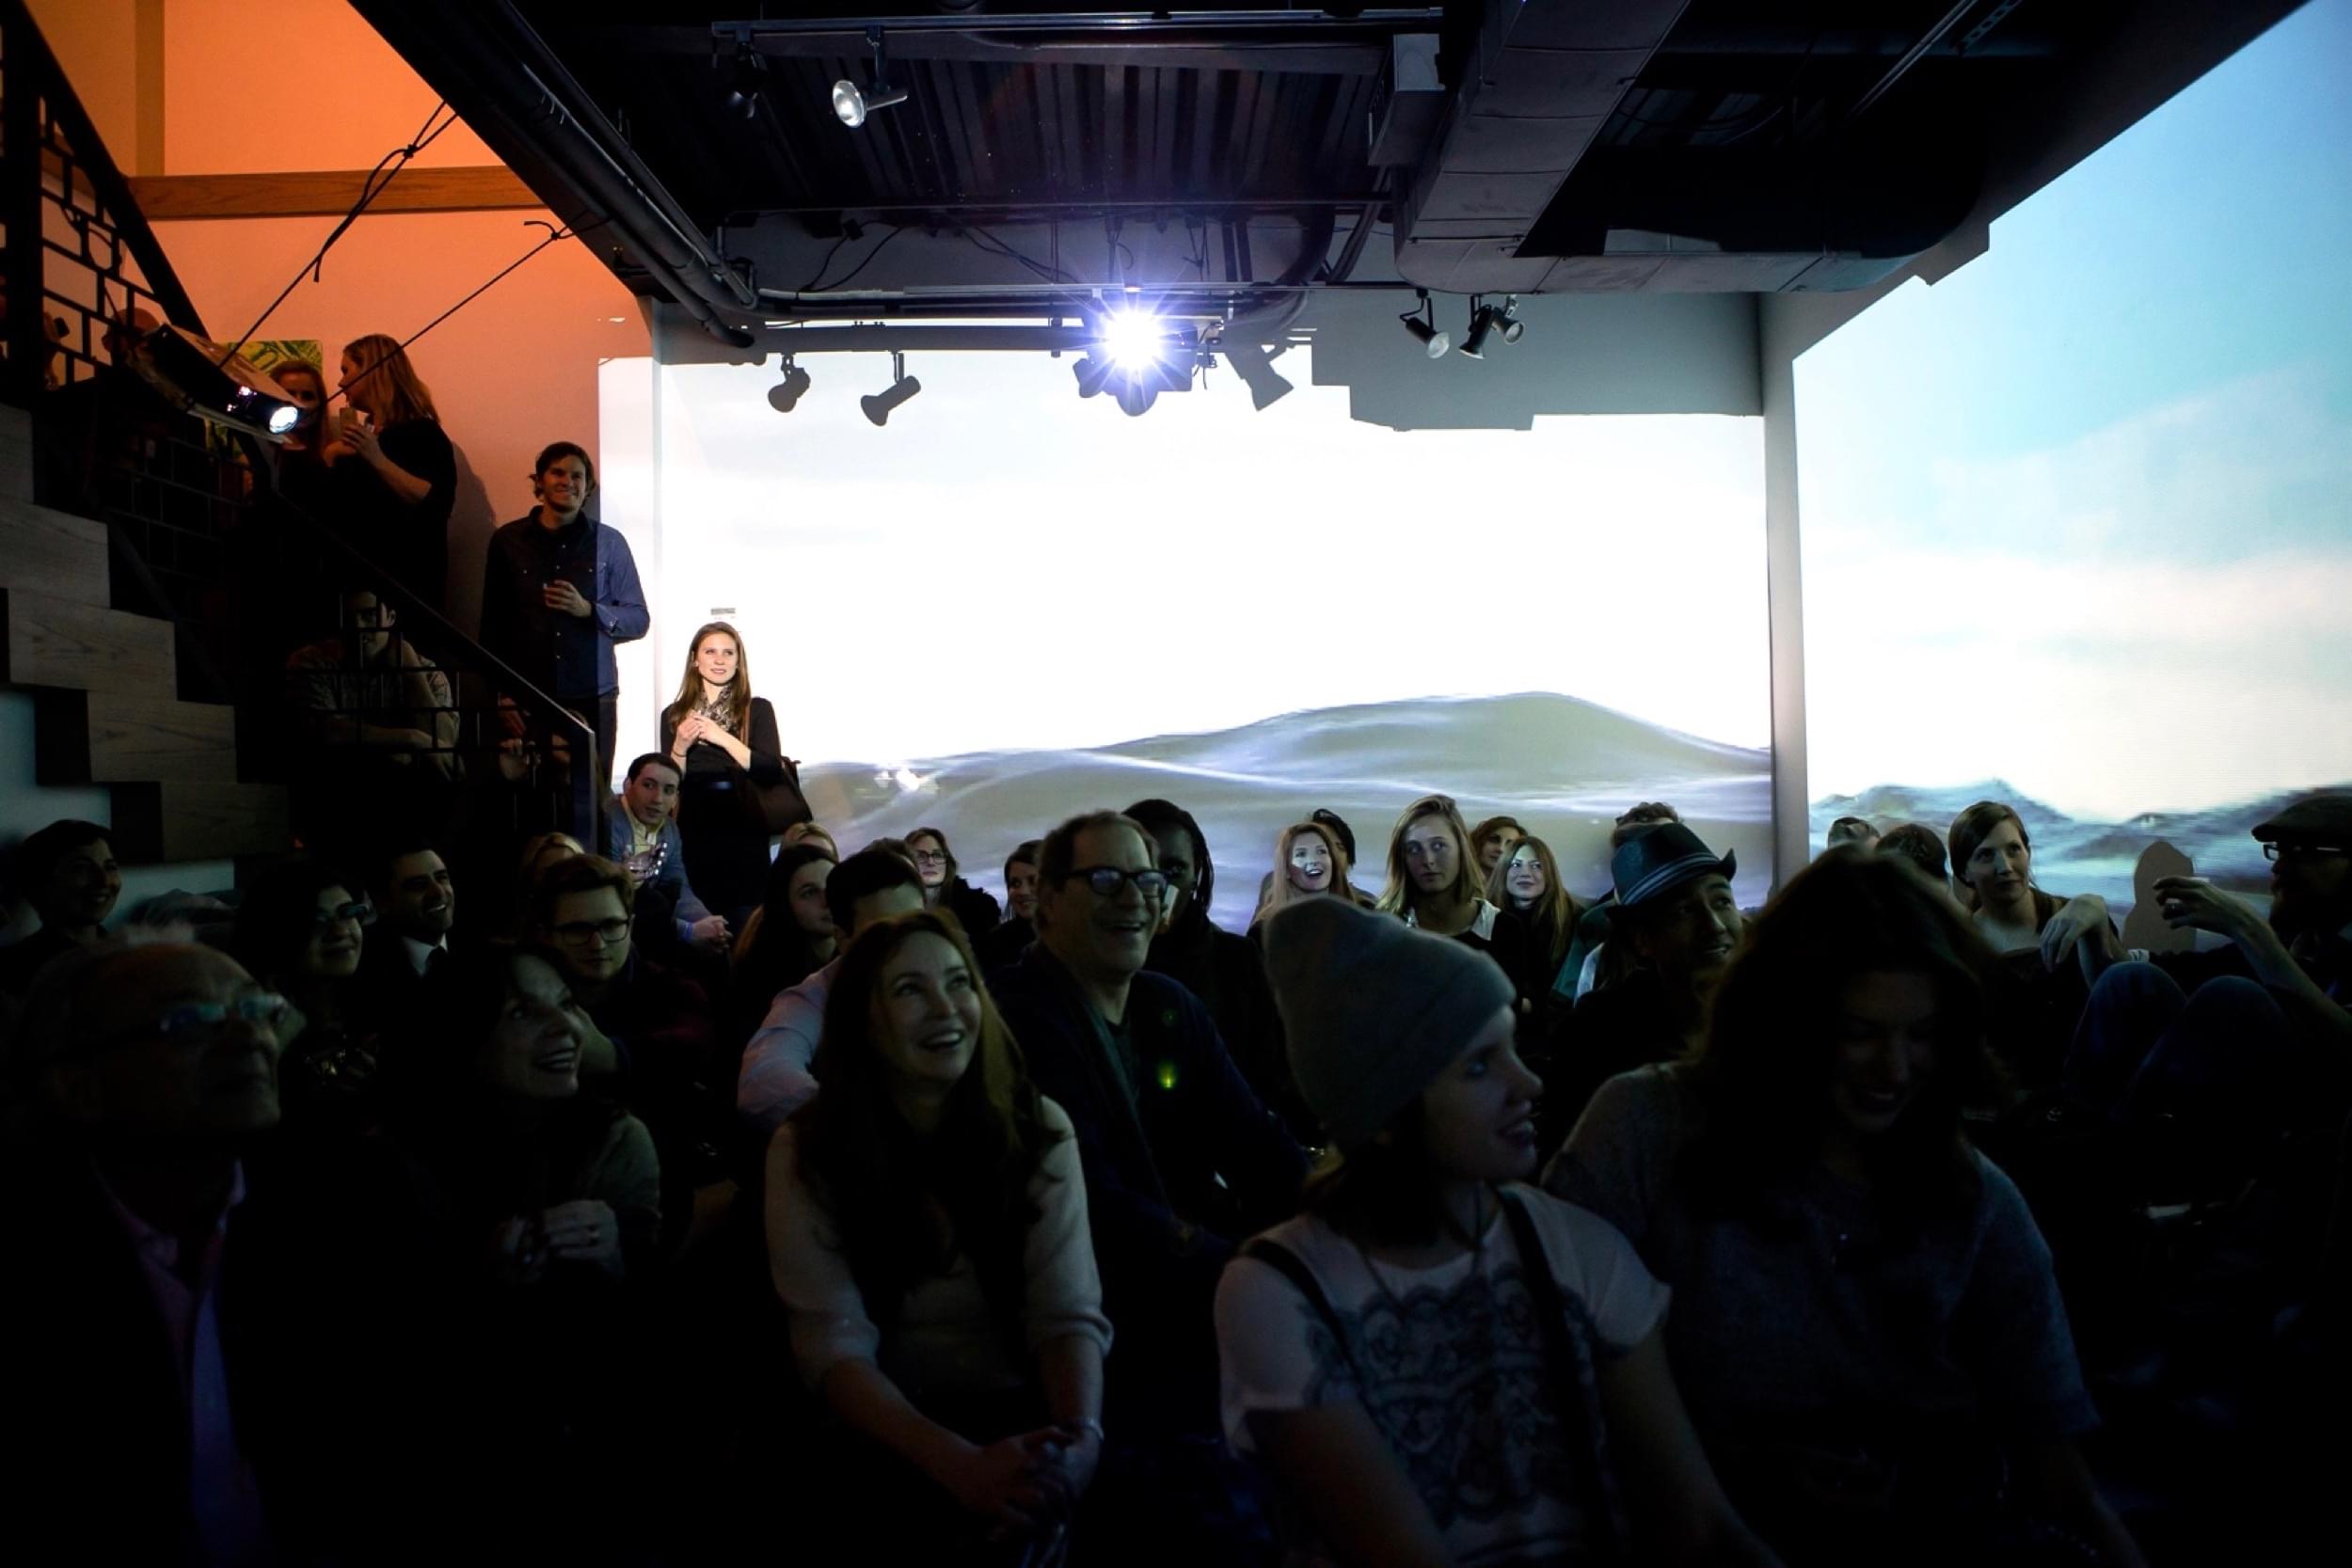 Photograph of a crowd of people sitting down in a dark gallery space with a body of water projected on the walls behind